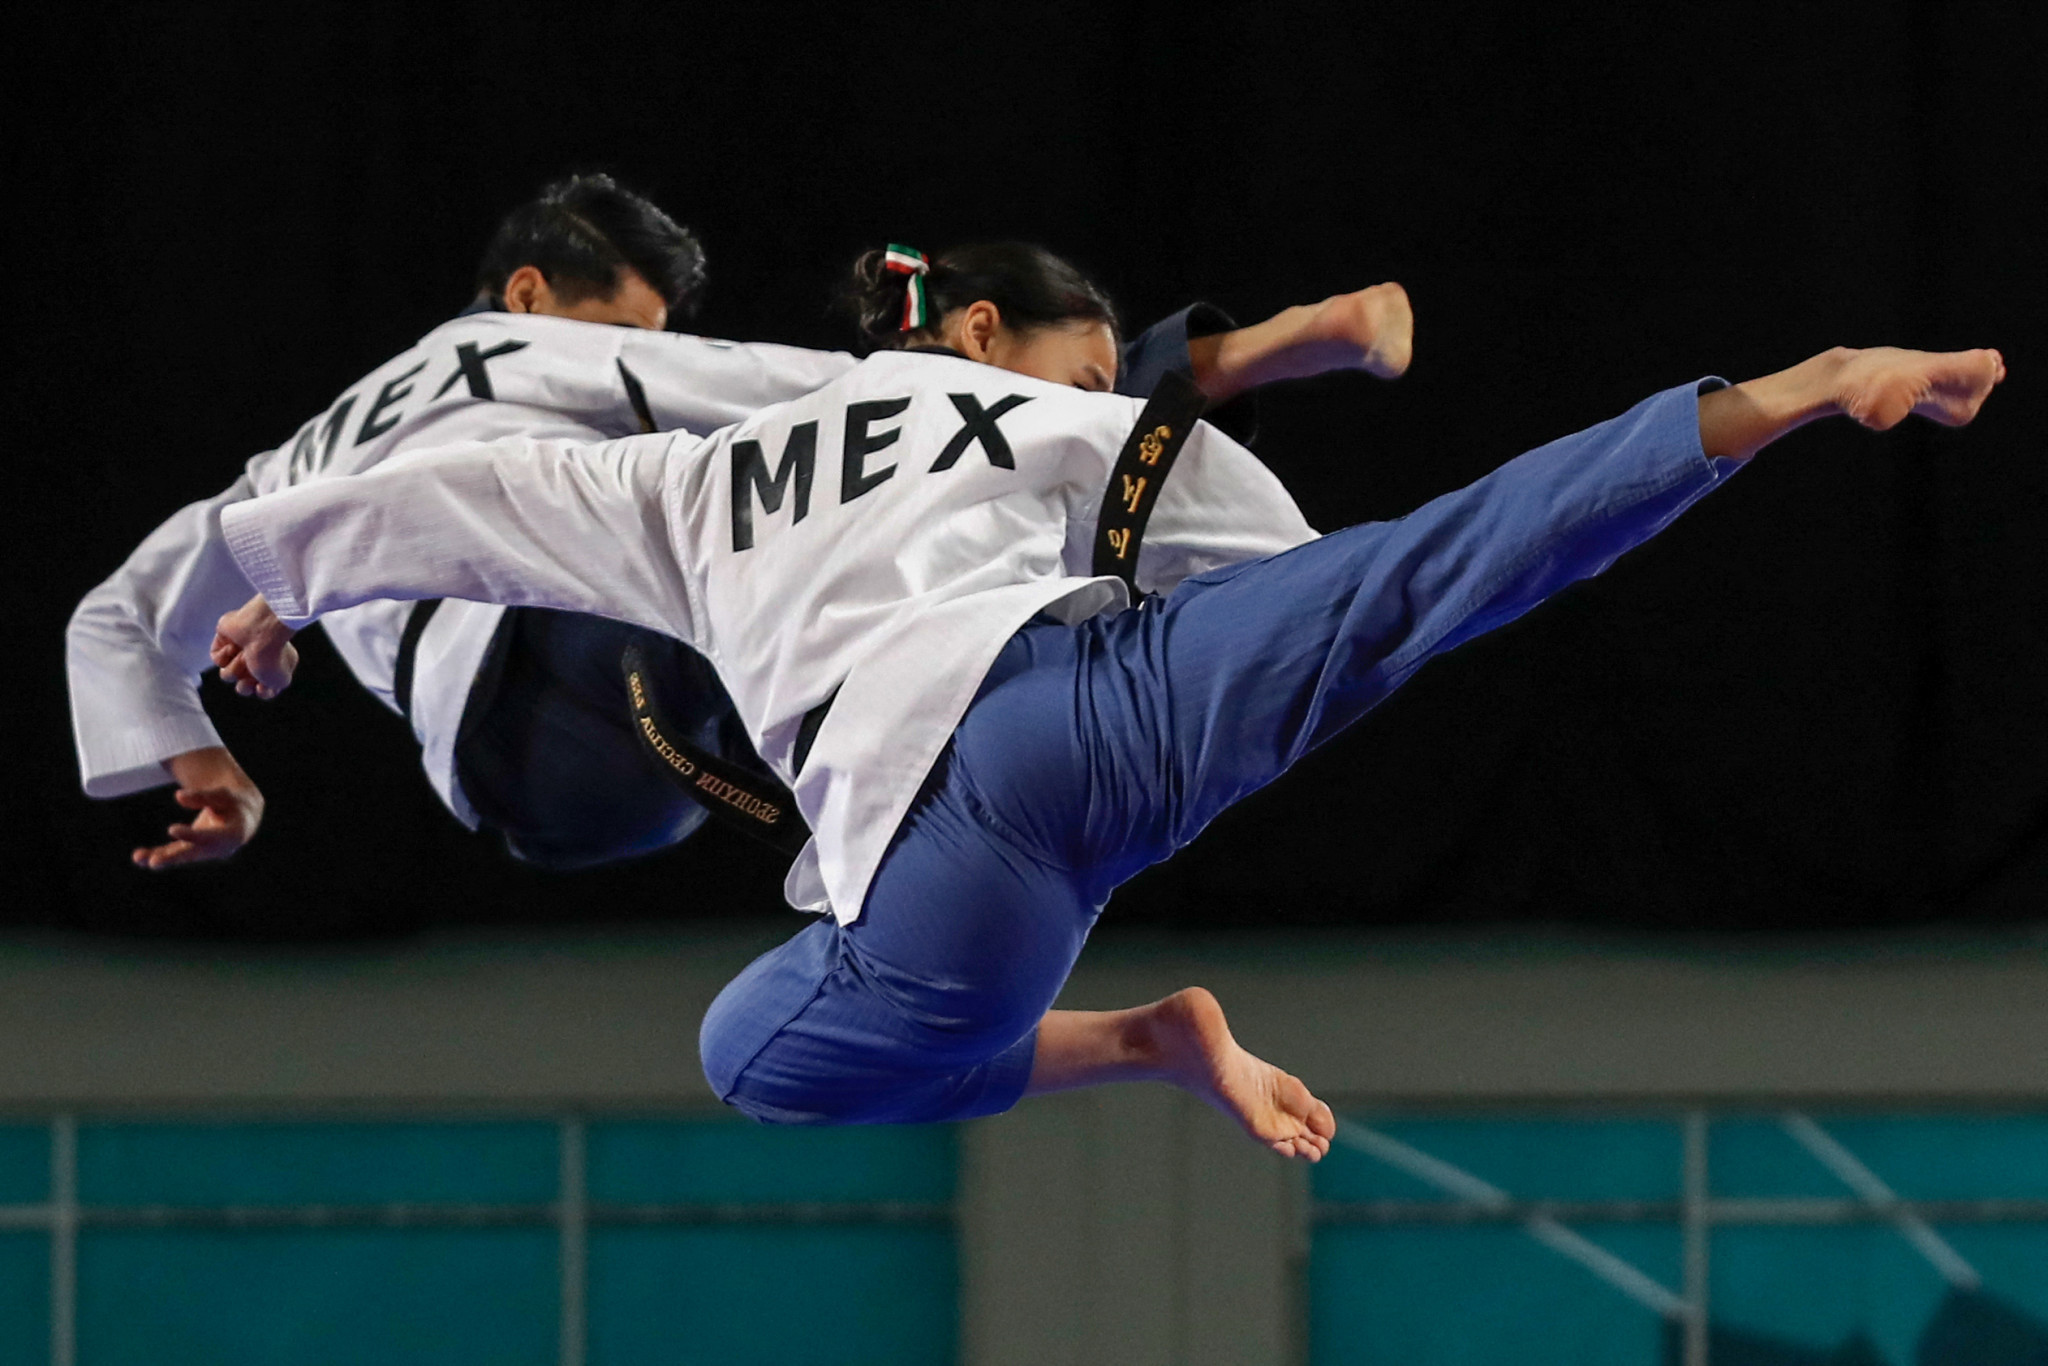 William Arroyo won his second gold of the Games for Mexico in poomsae taekwondo ©Getty Images